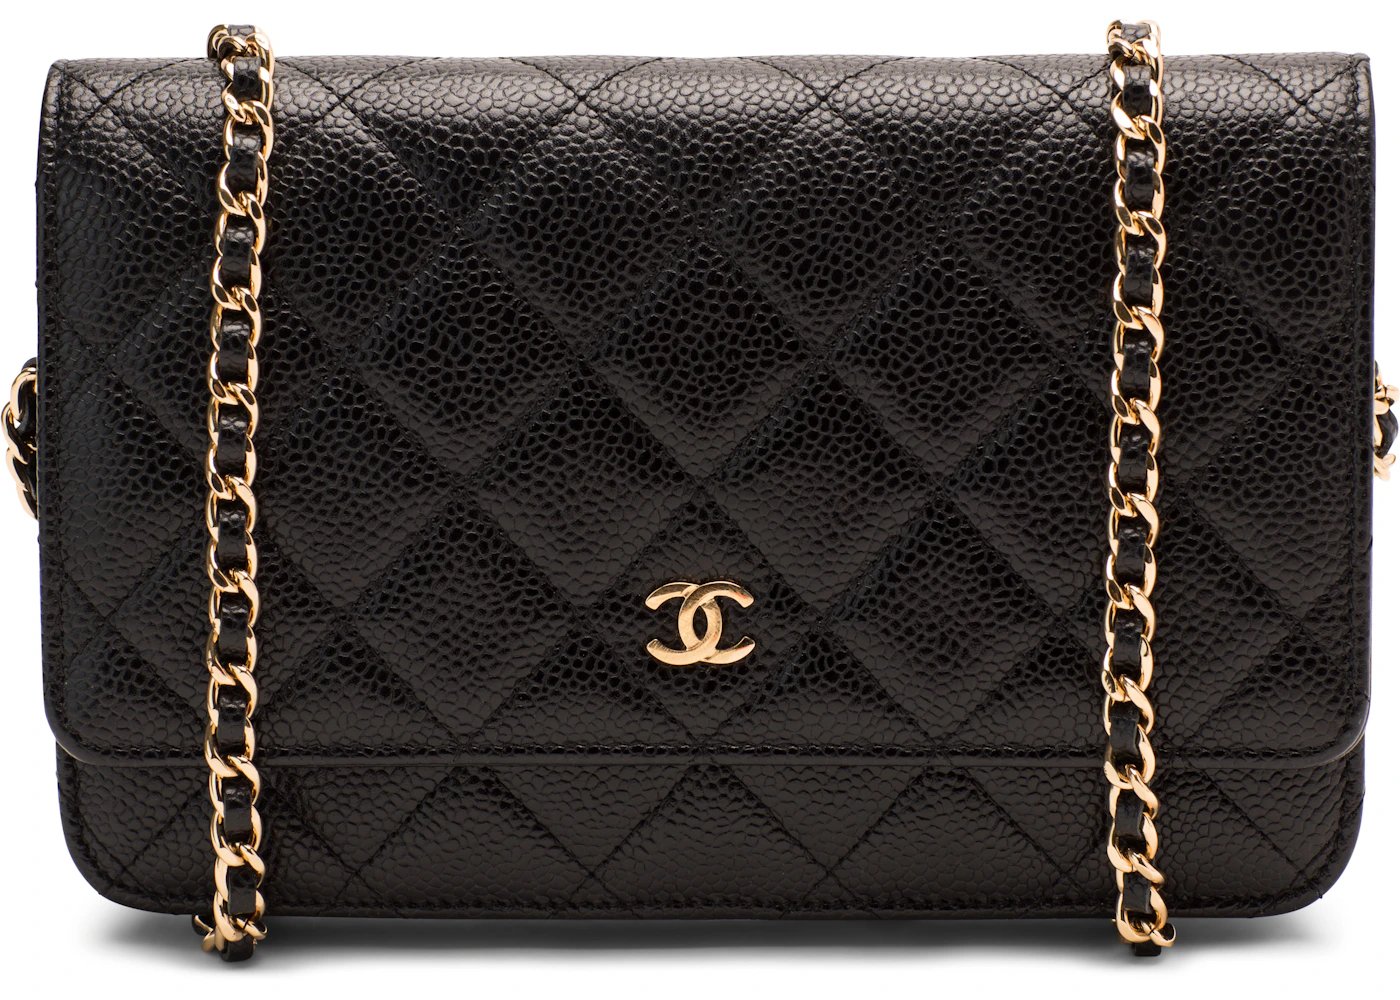 chanel wallet on chain sale